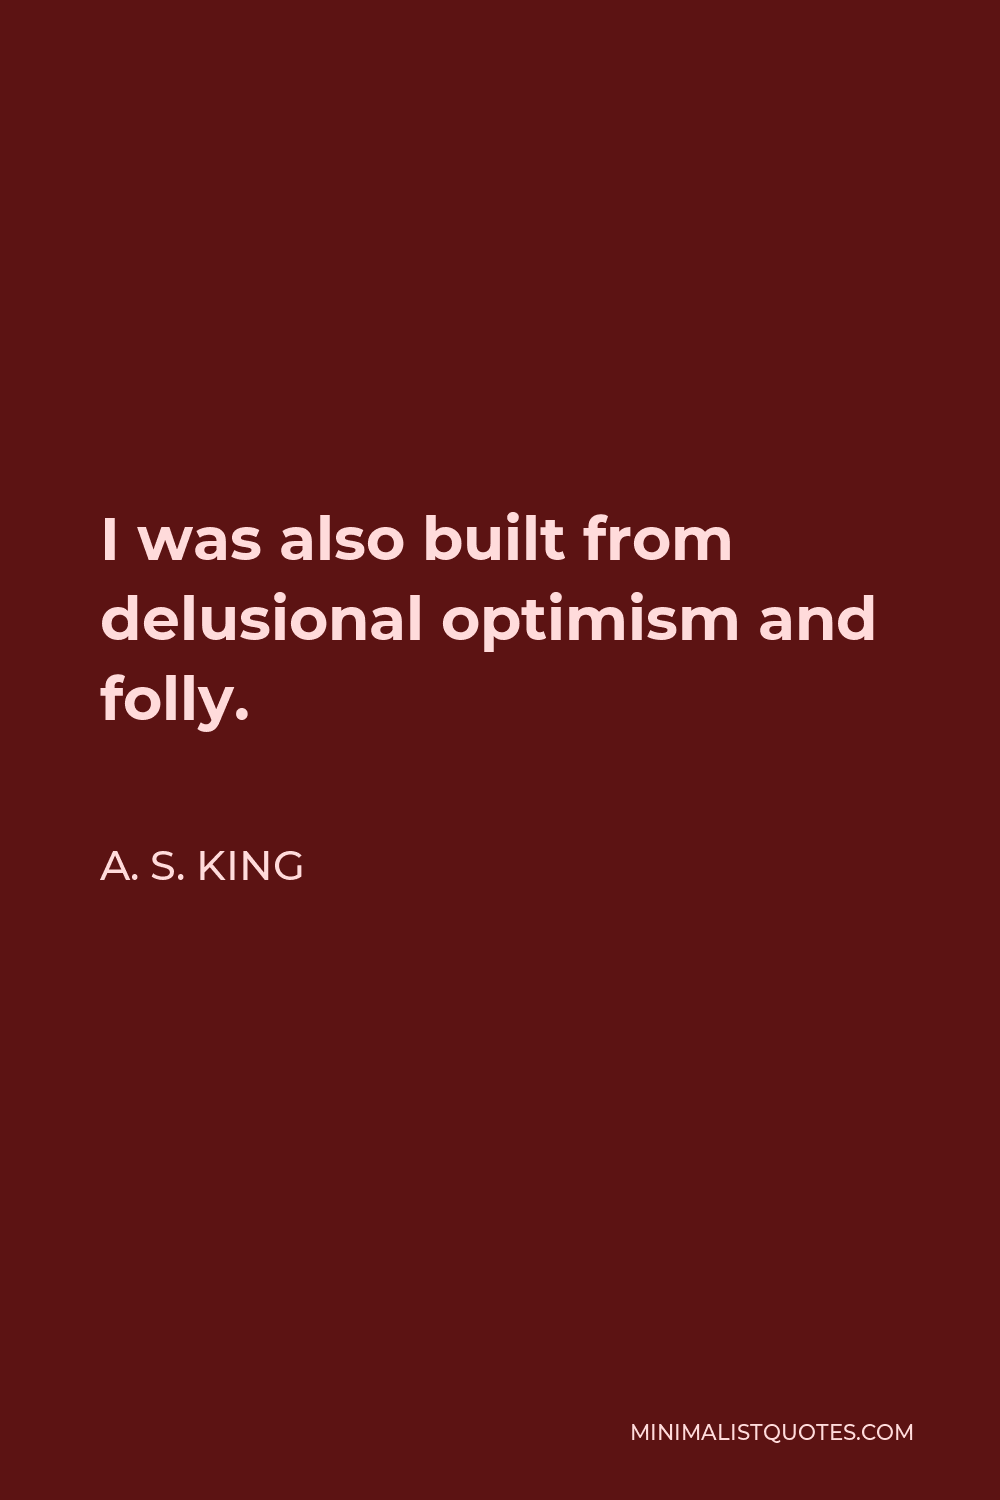 A. S. King Quote - I was also built from delusional optimism and folly.